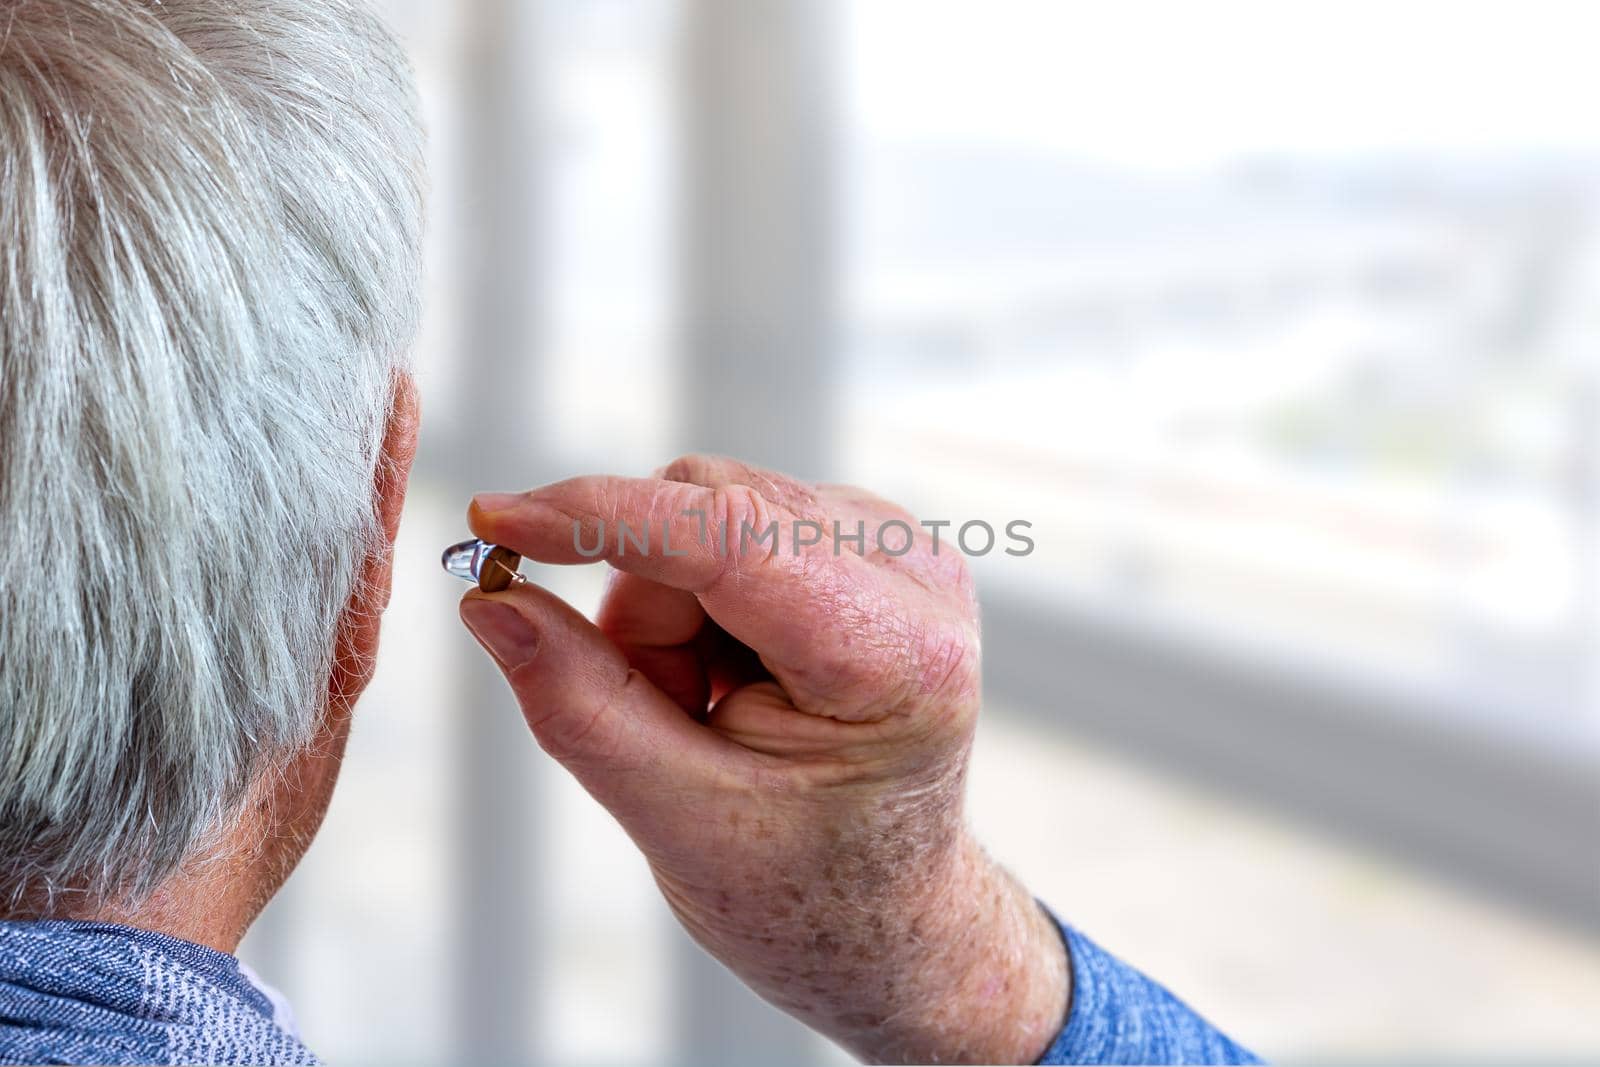 Hearing aid in a senior man by JPC-PROD